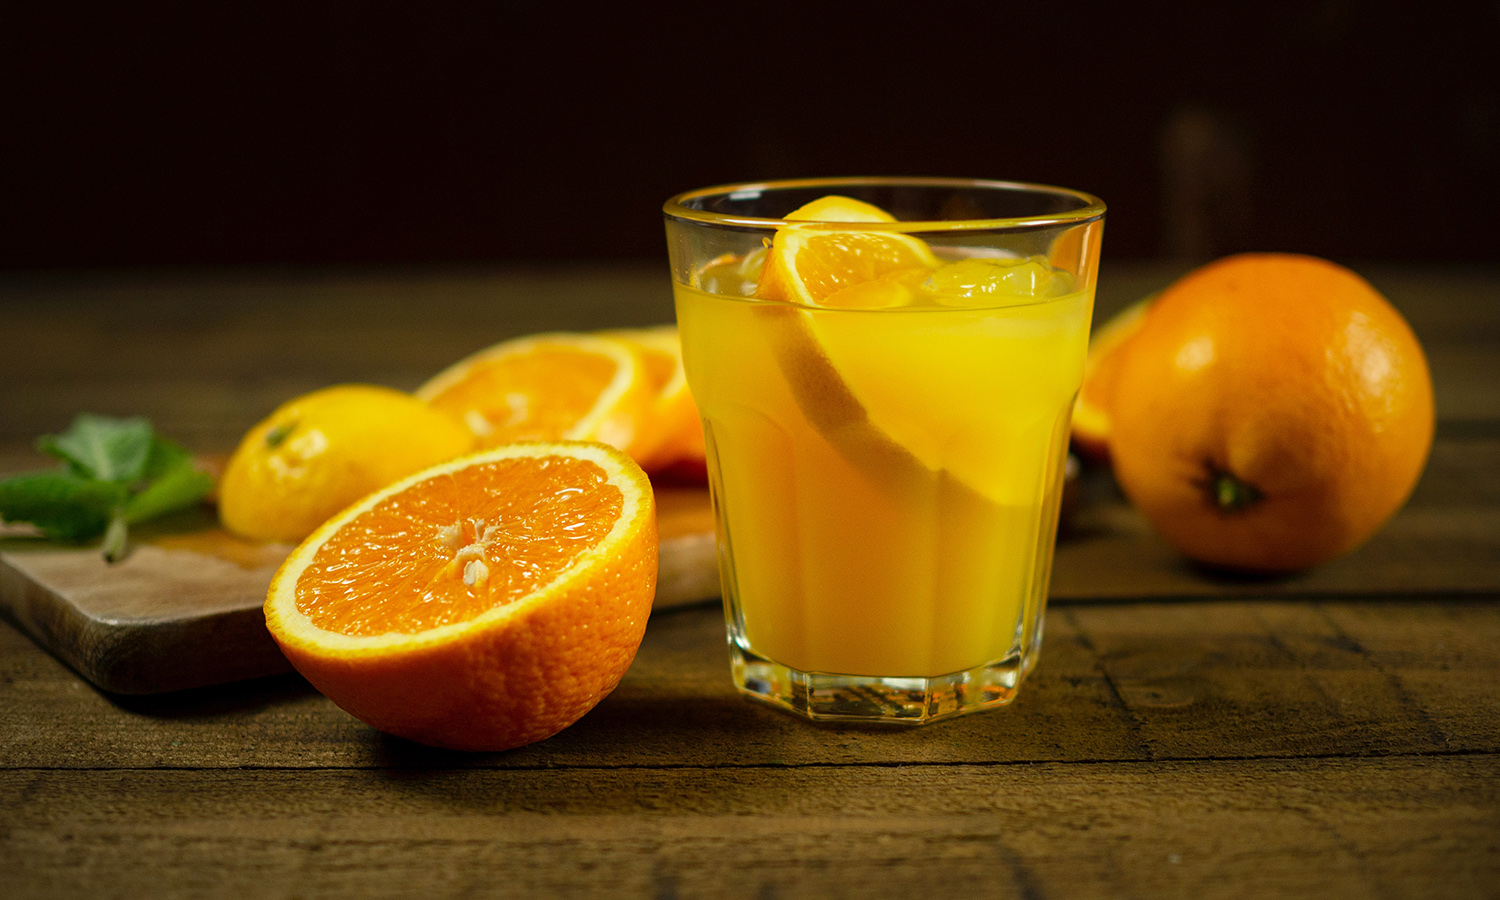 Can dogs have orange juice fresh squeezed orange juice in a glass cup